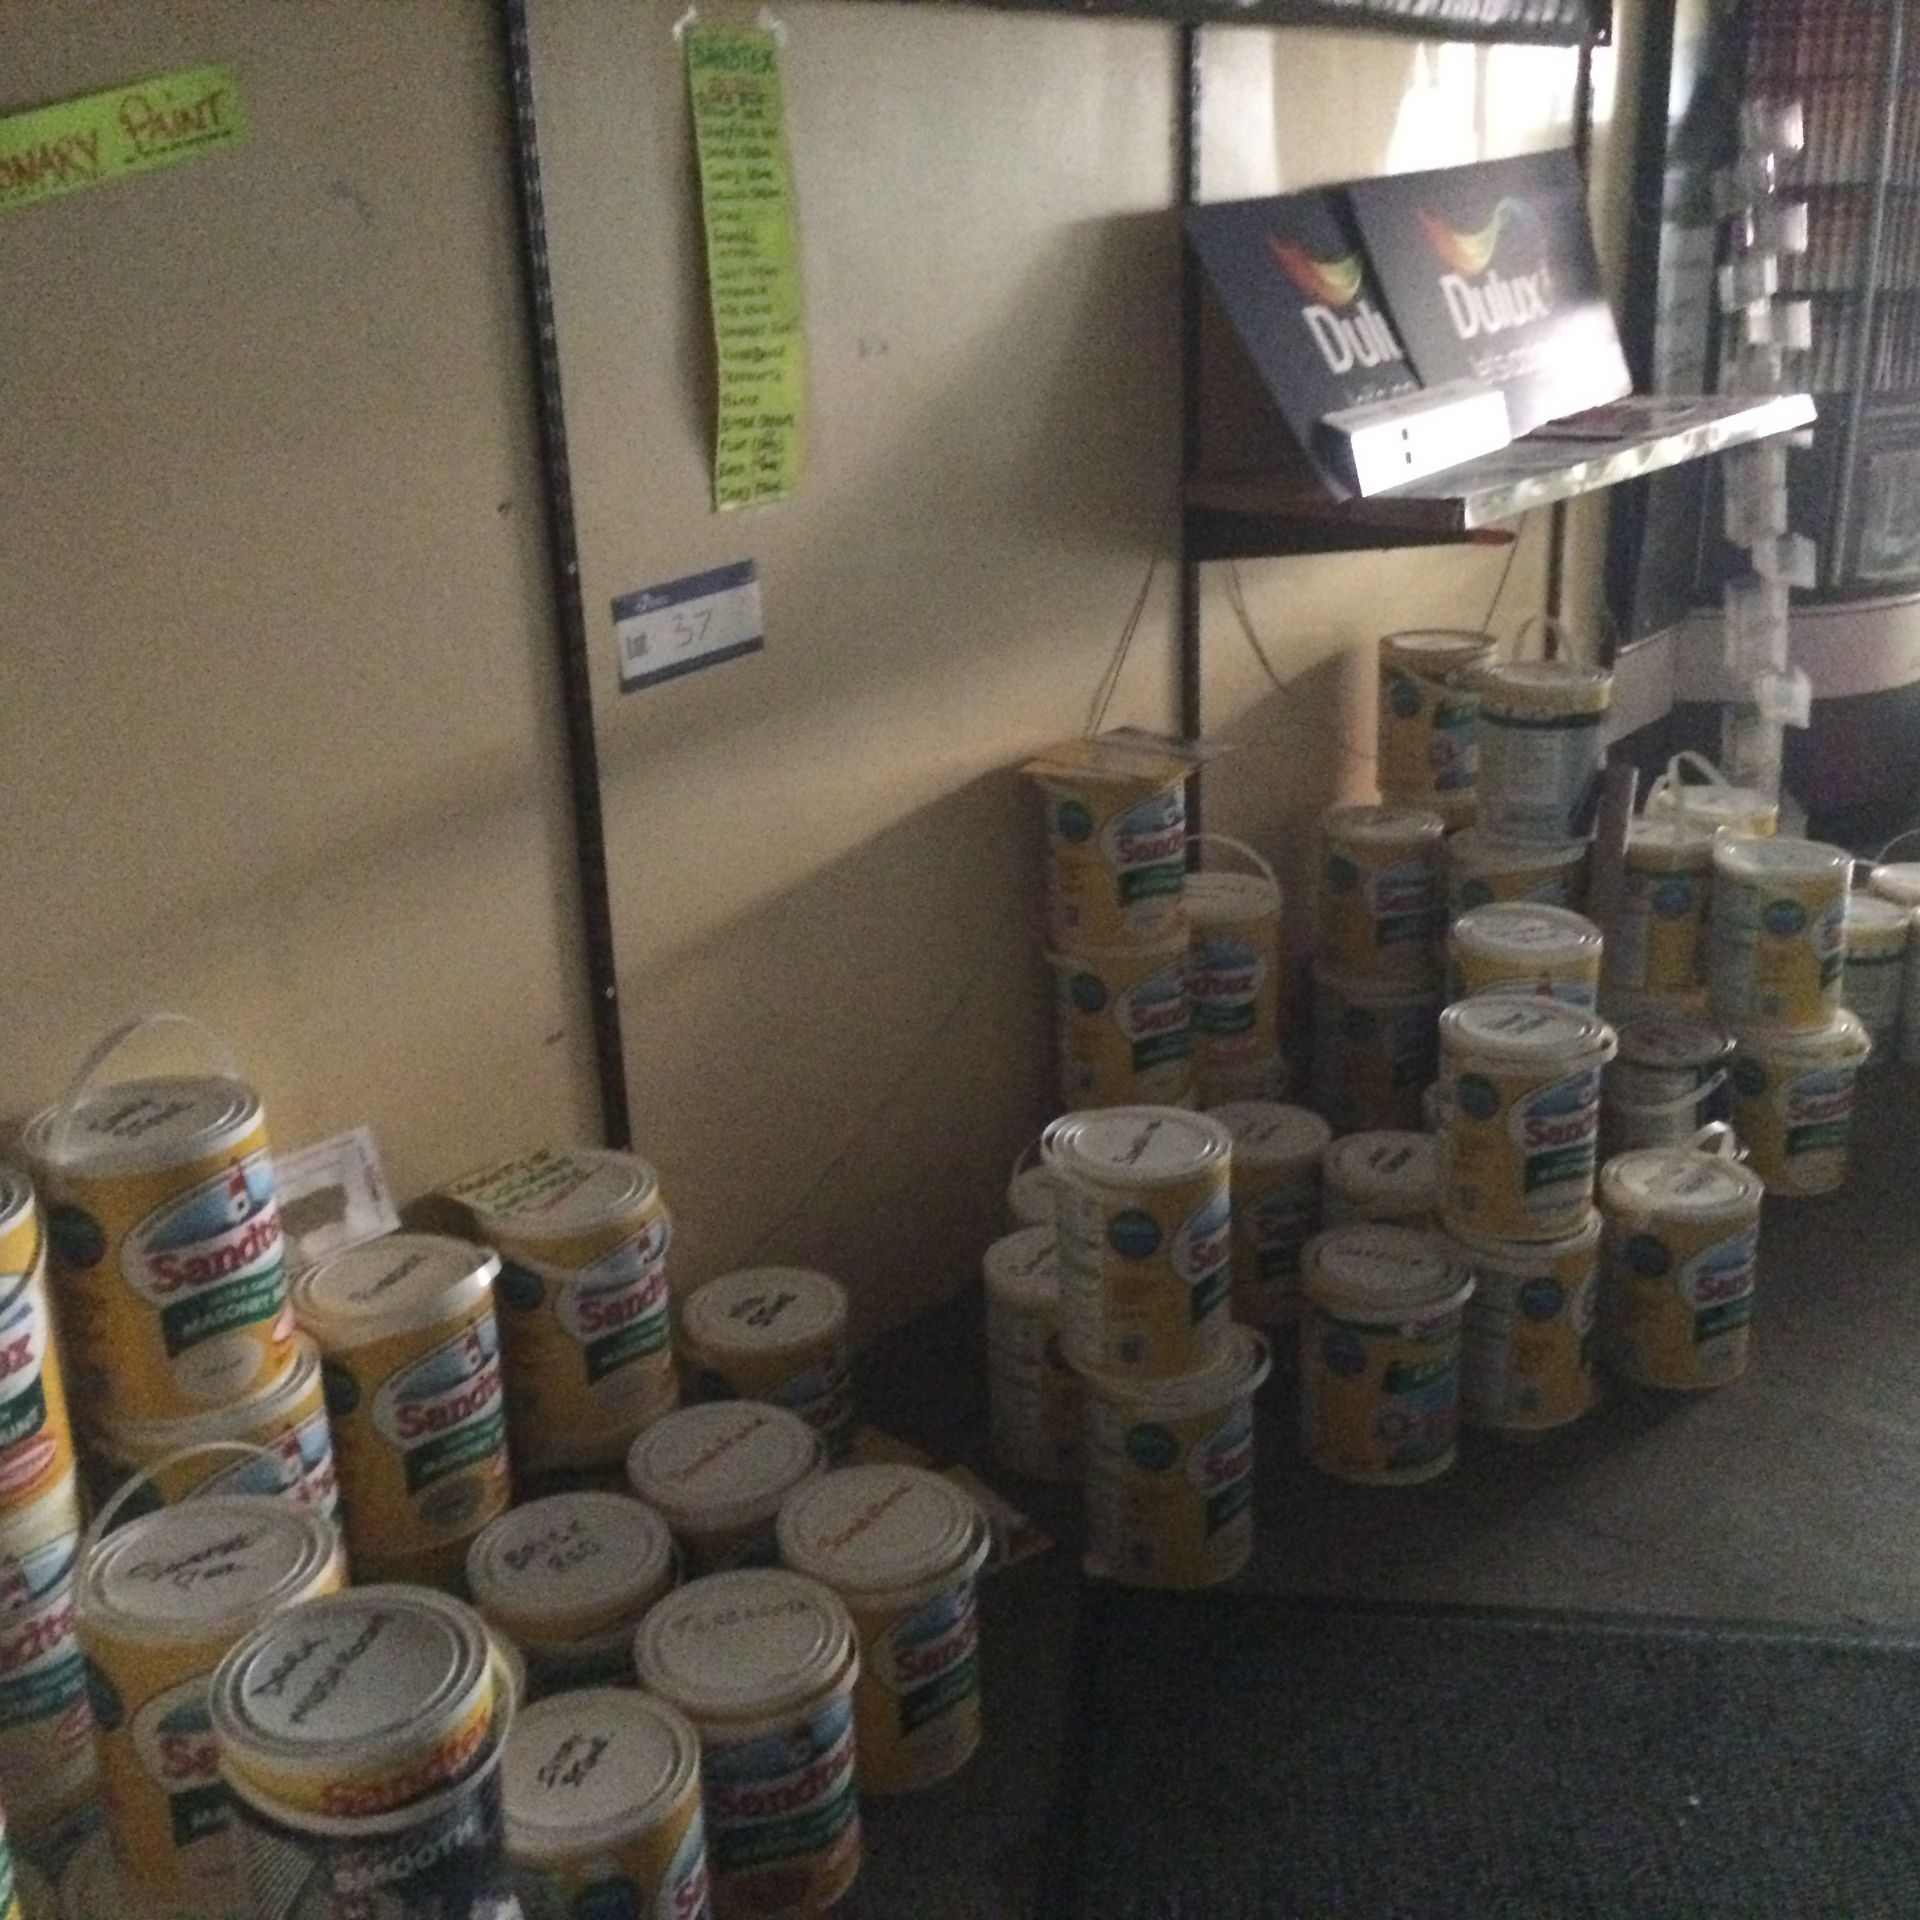 Quantity of Mainly Exterior Paints, as set out in Mixing Area